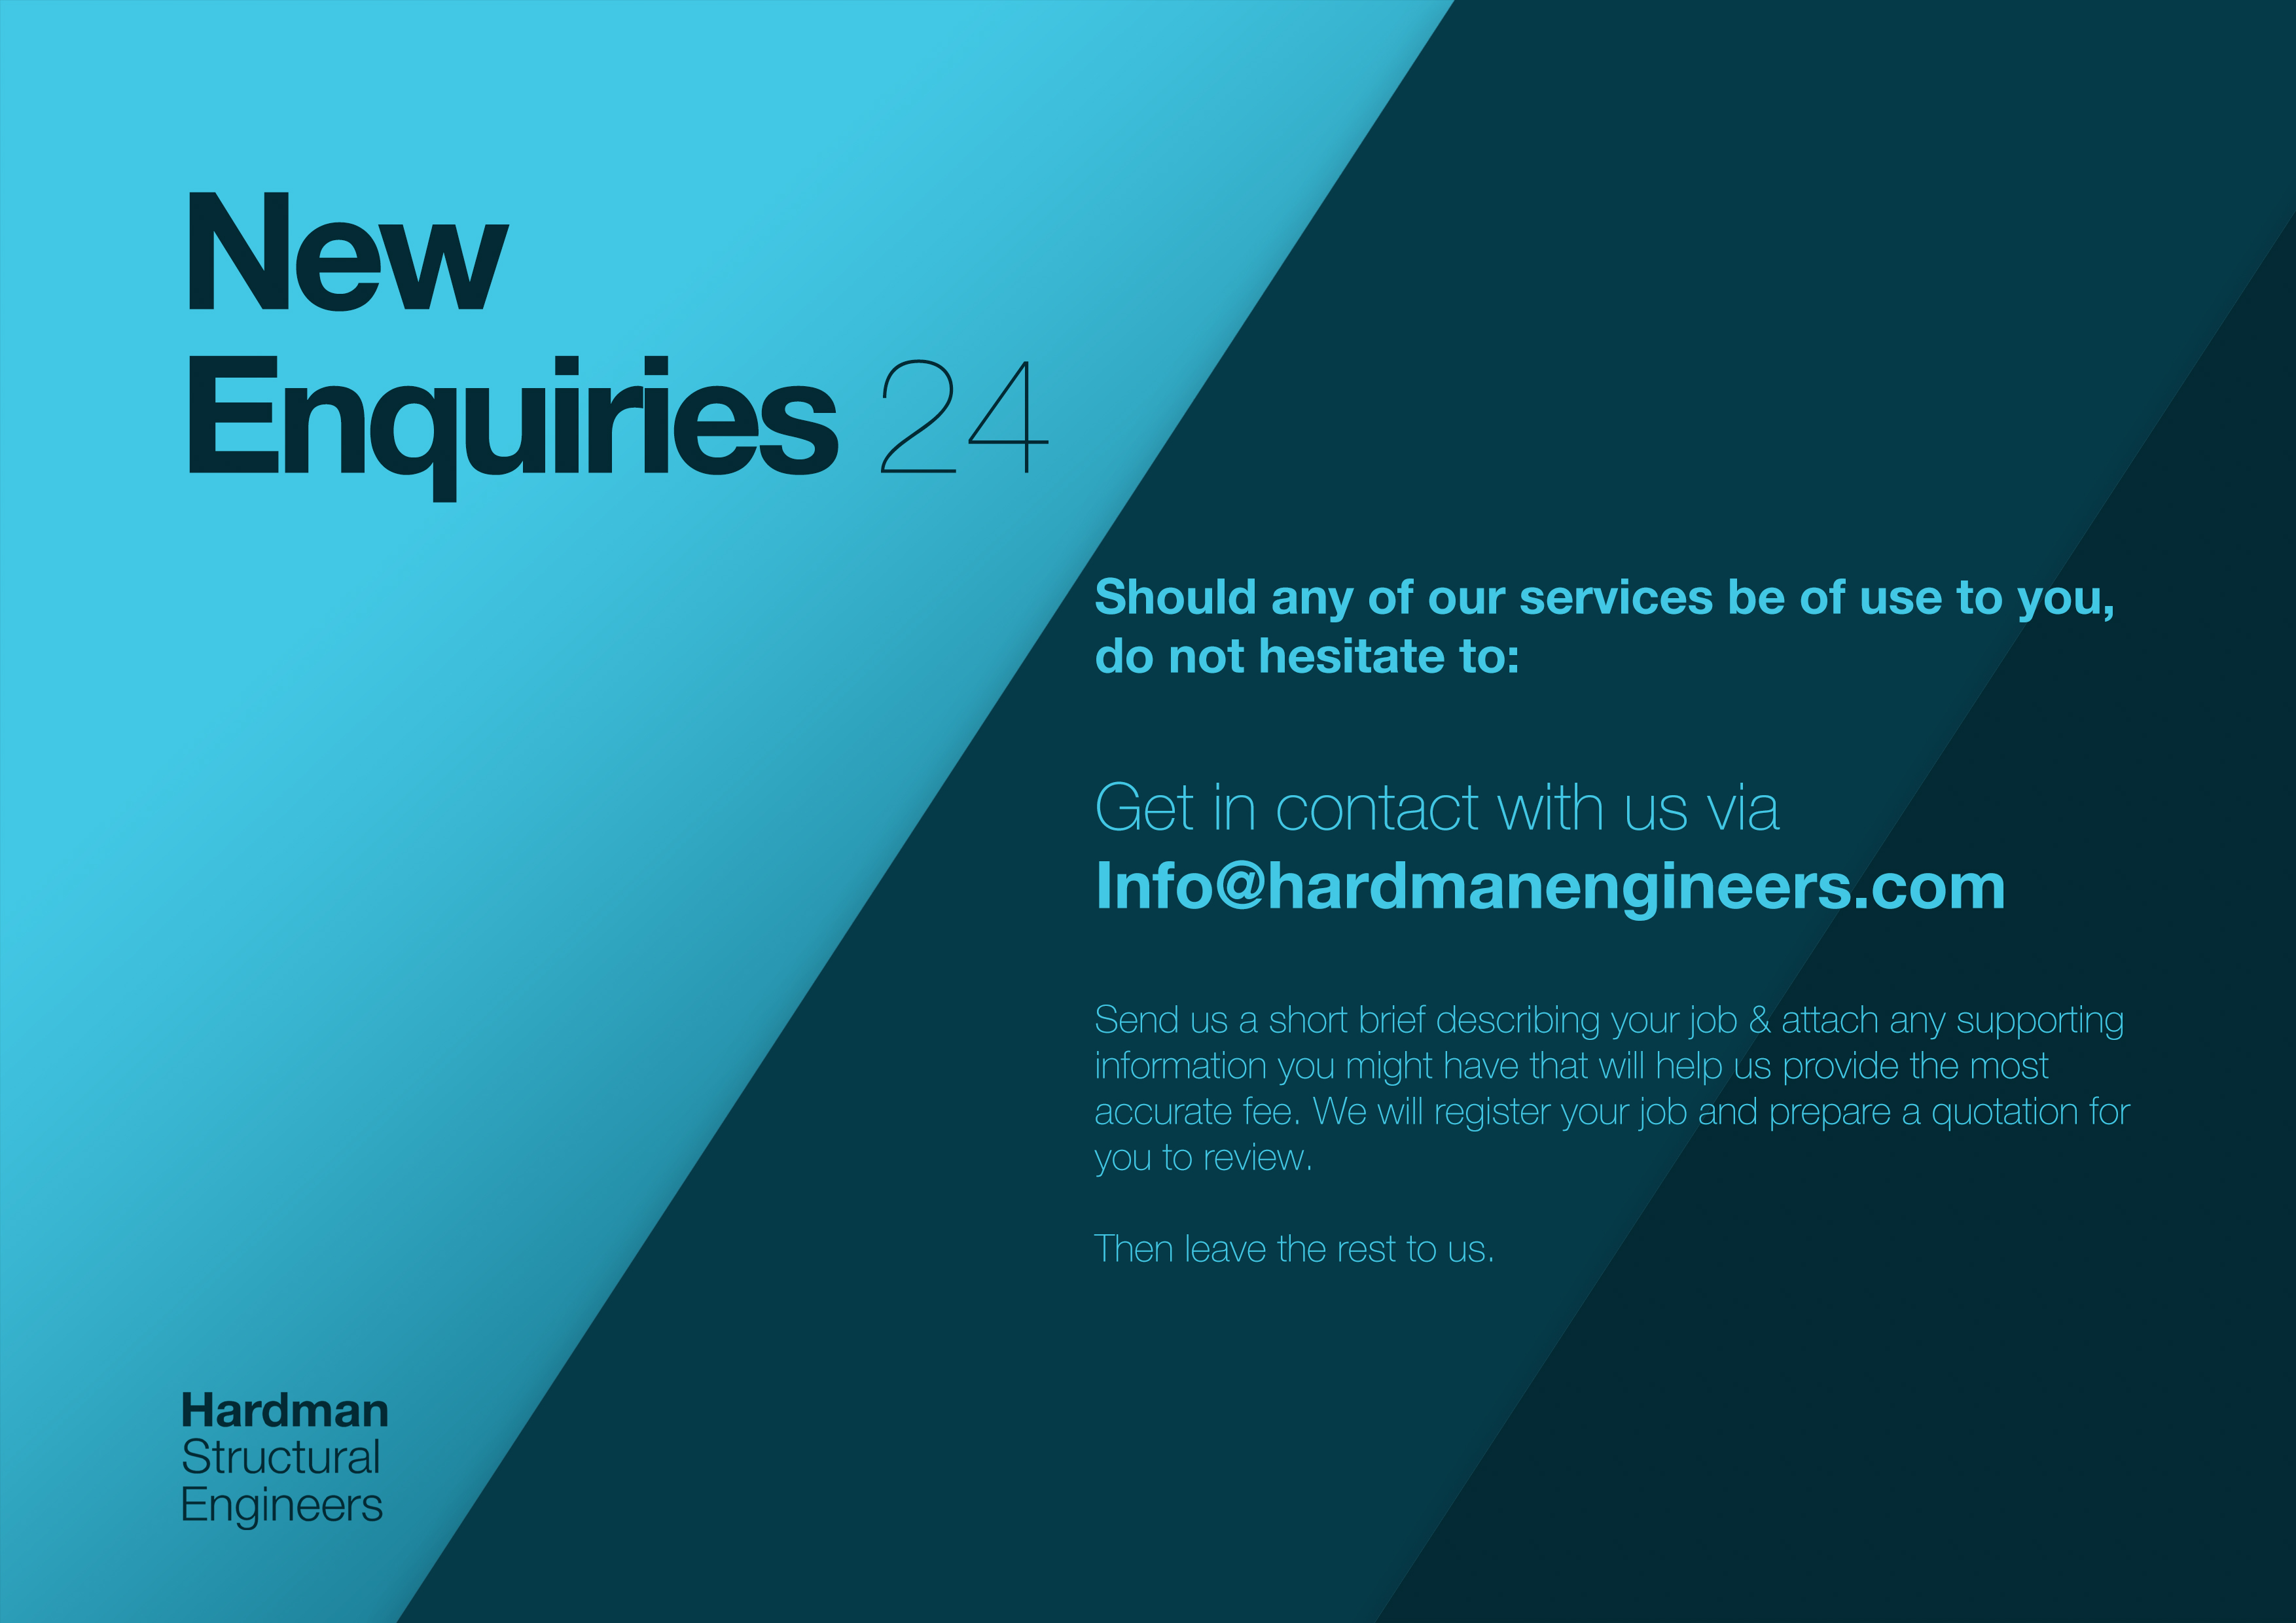 Our Year '23 - HSE - New Enquiries